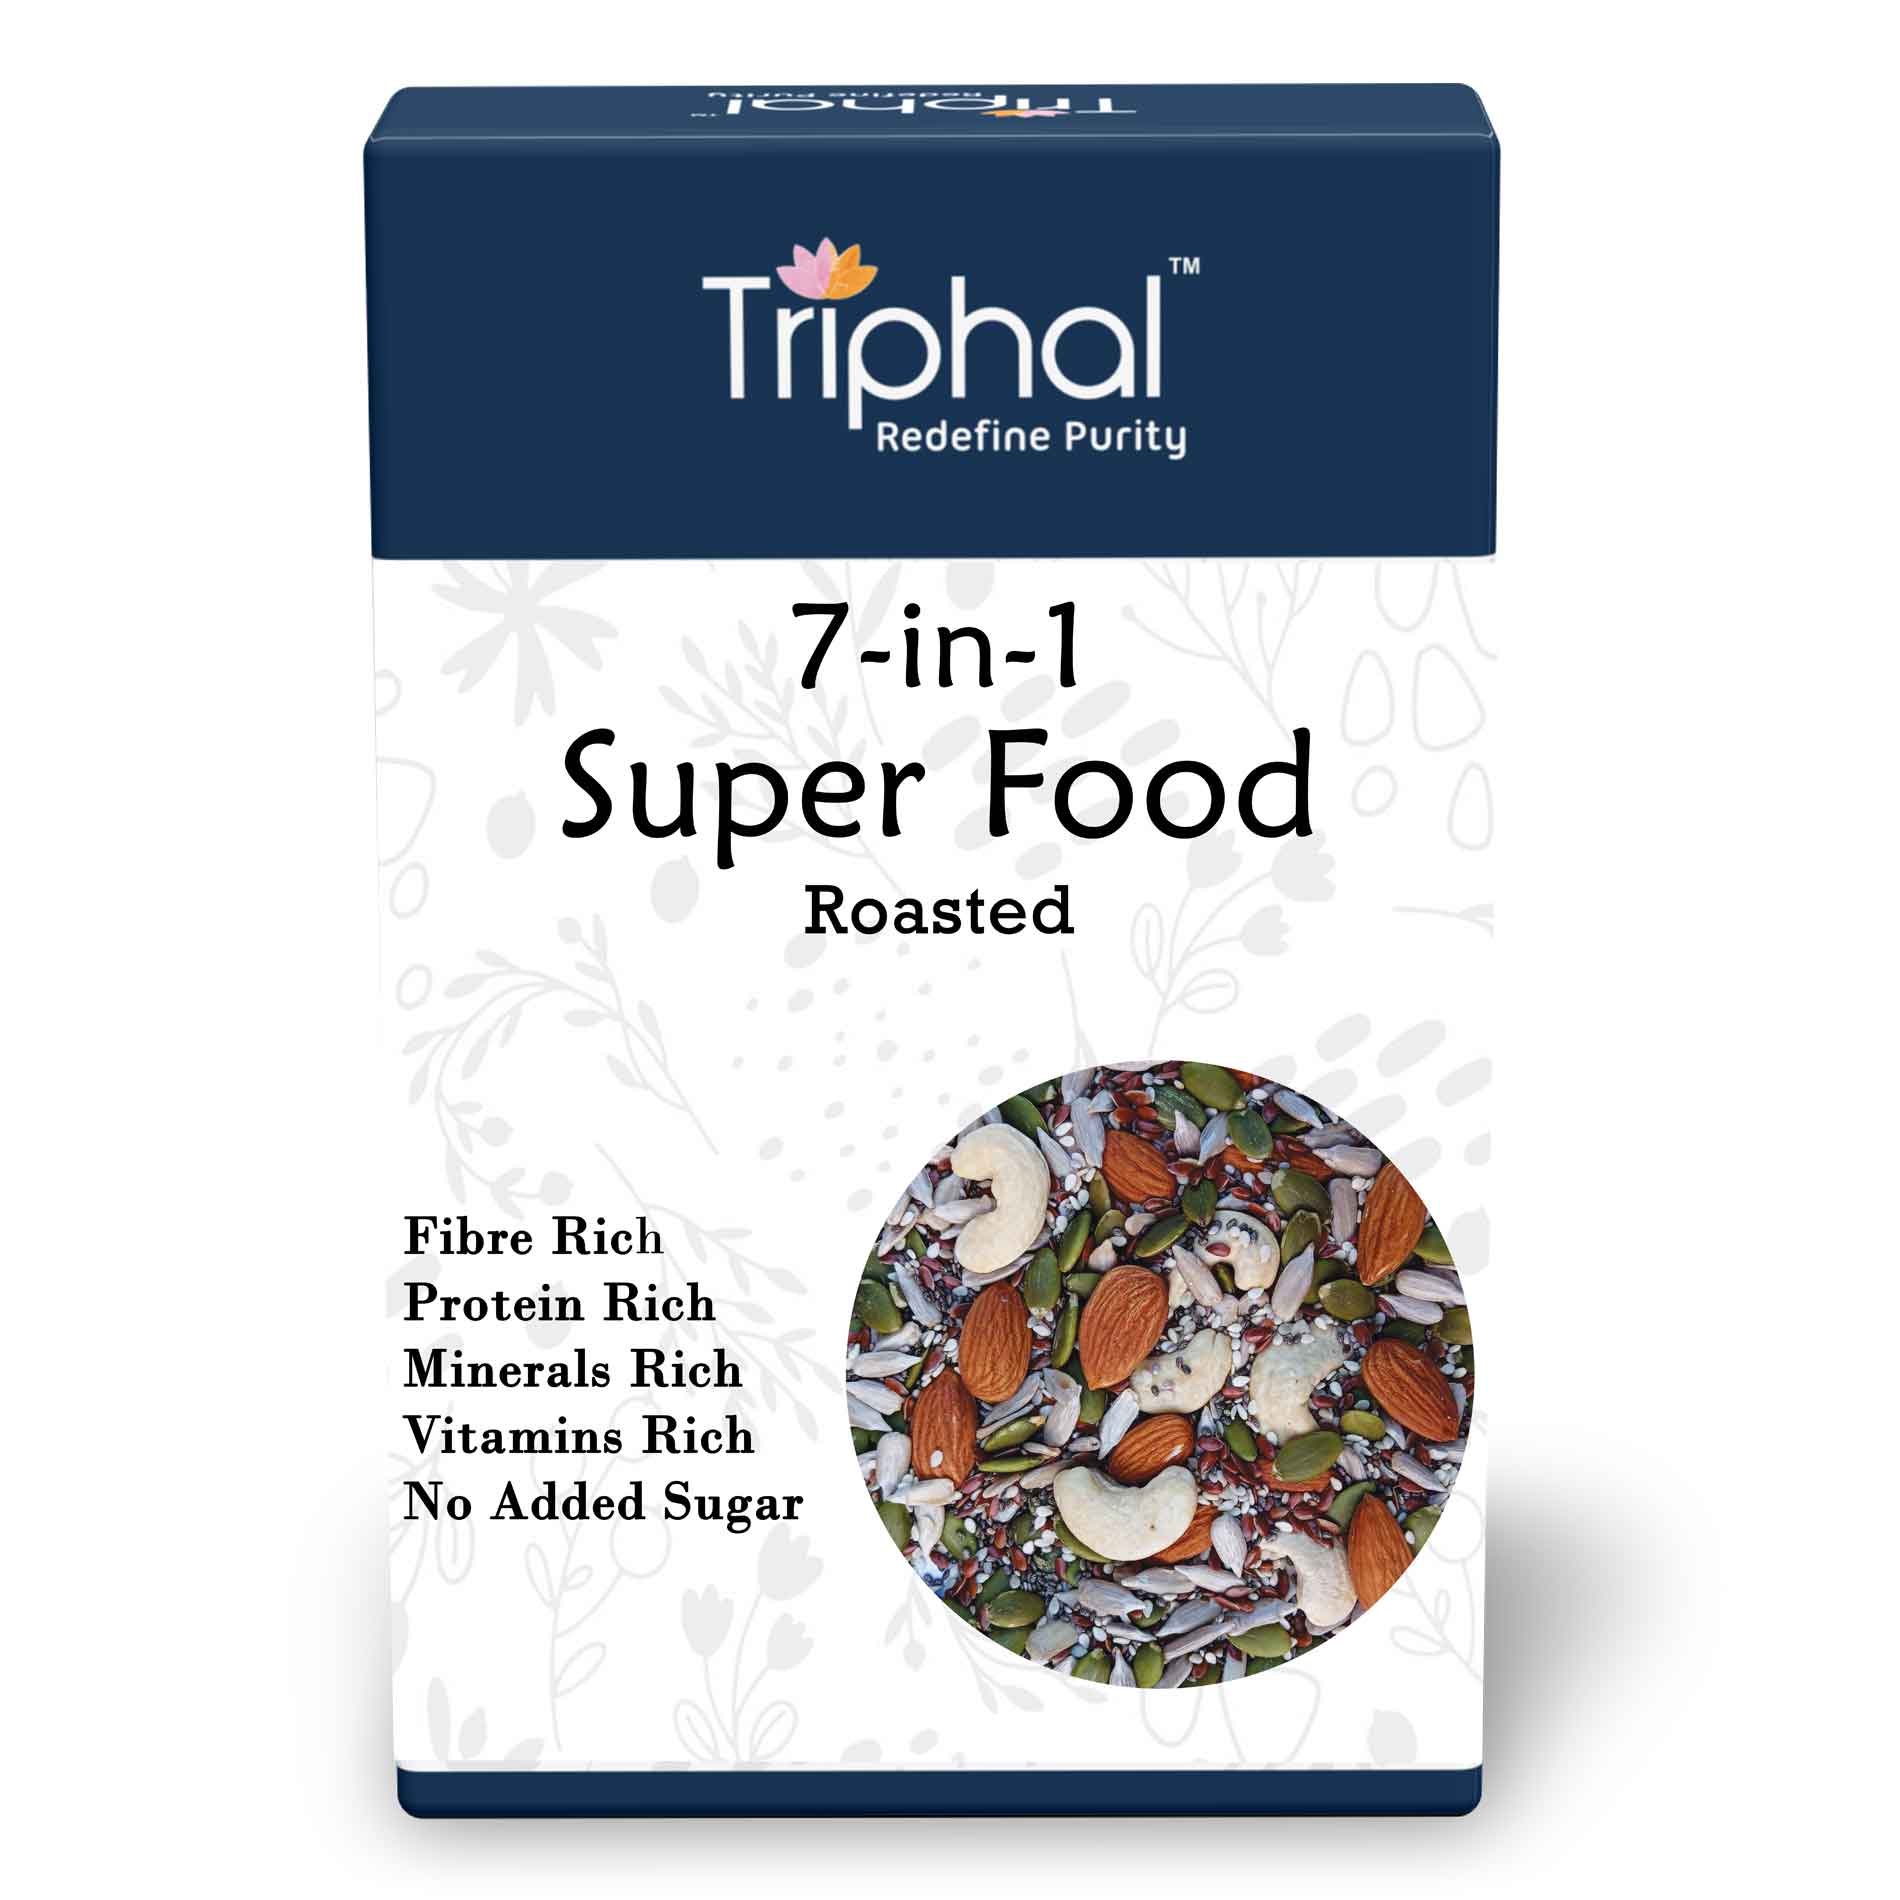 7 in 1 Super Food - A unique mixture of 7 super edible seeds and nuts